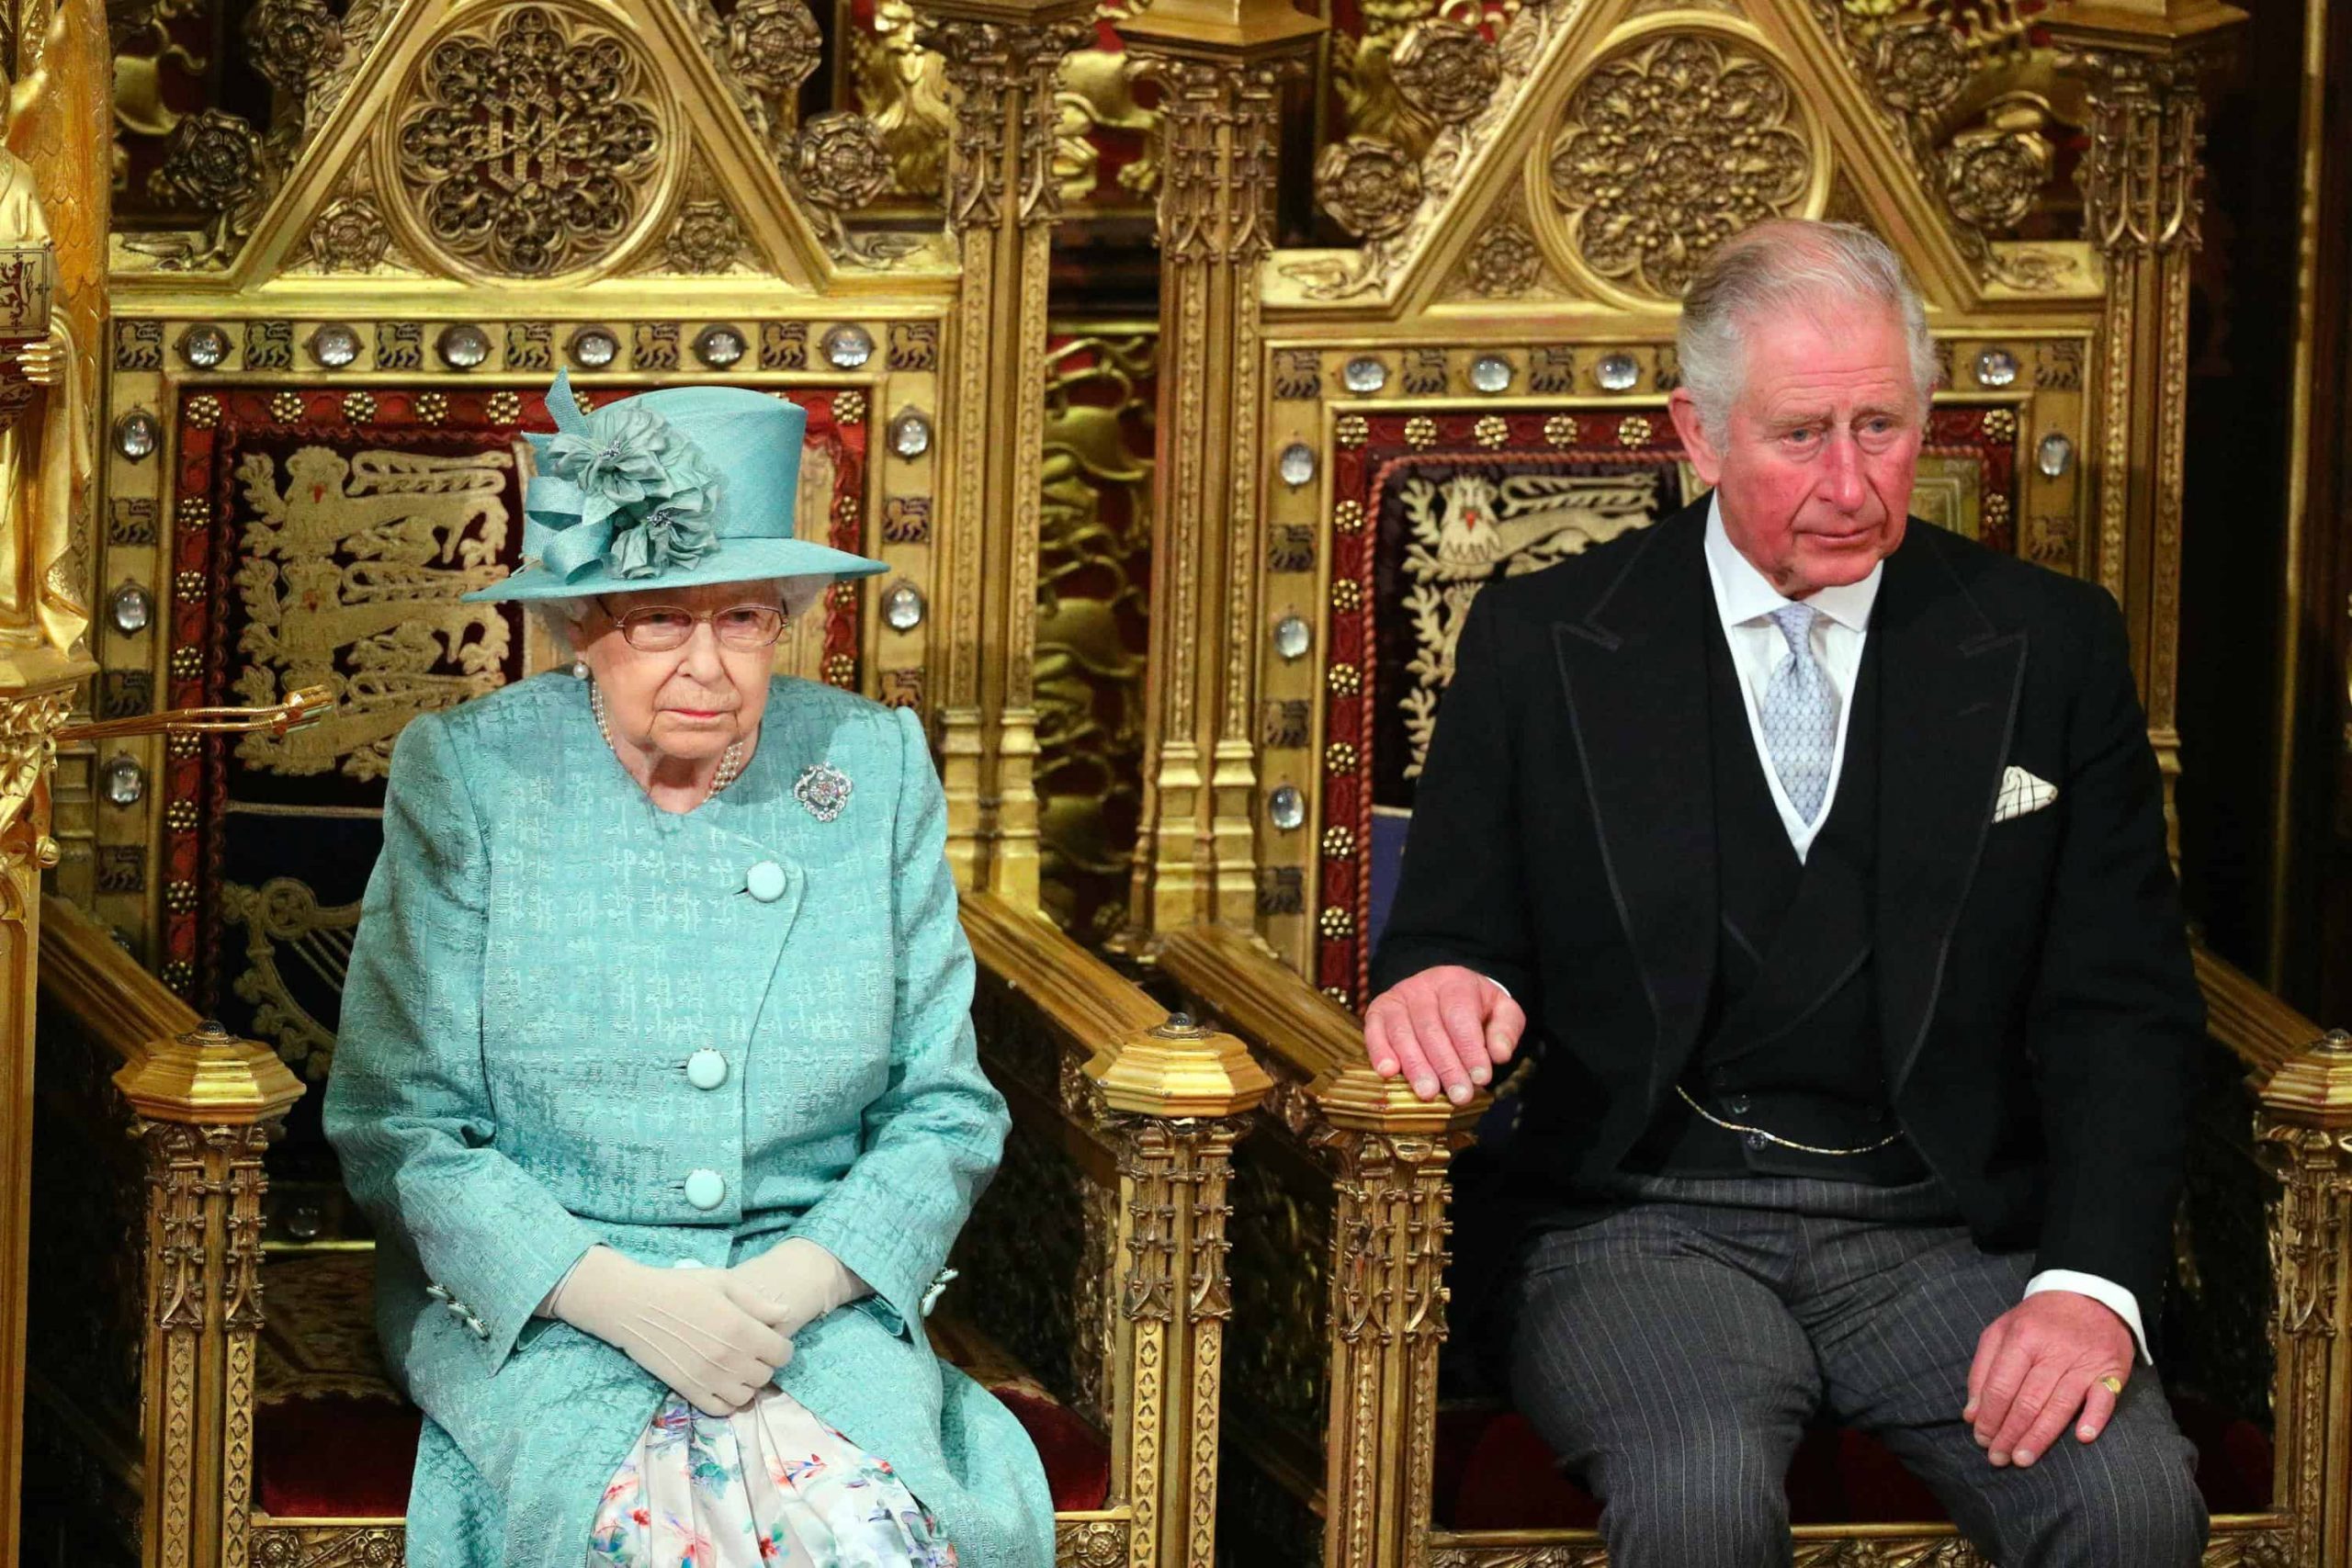 Prince Charles and William rush to be by Queen’s side following health concerns